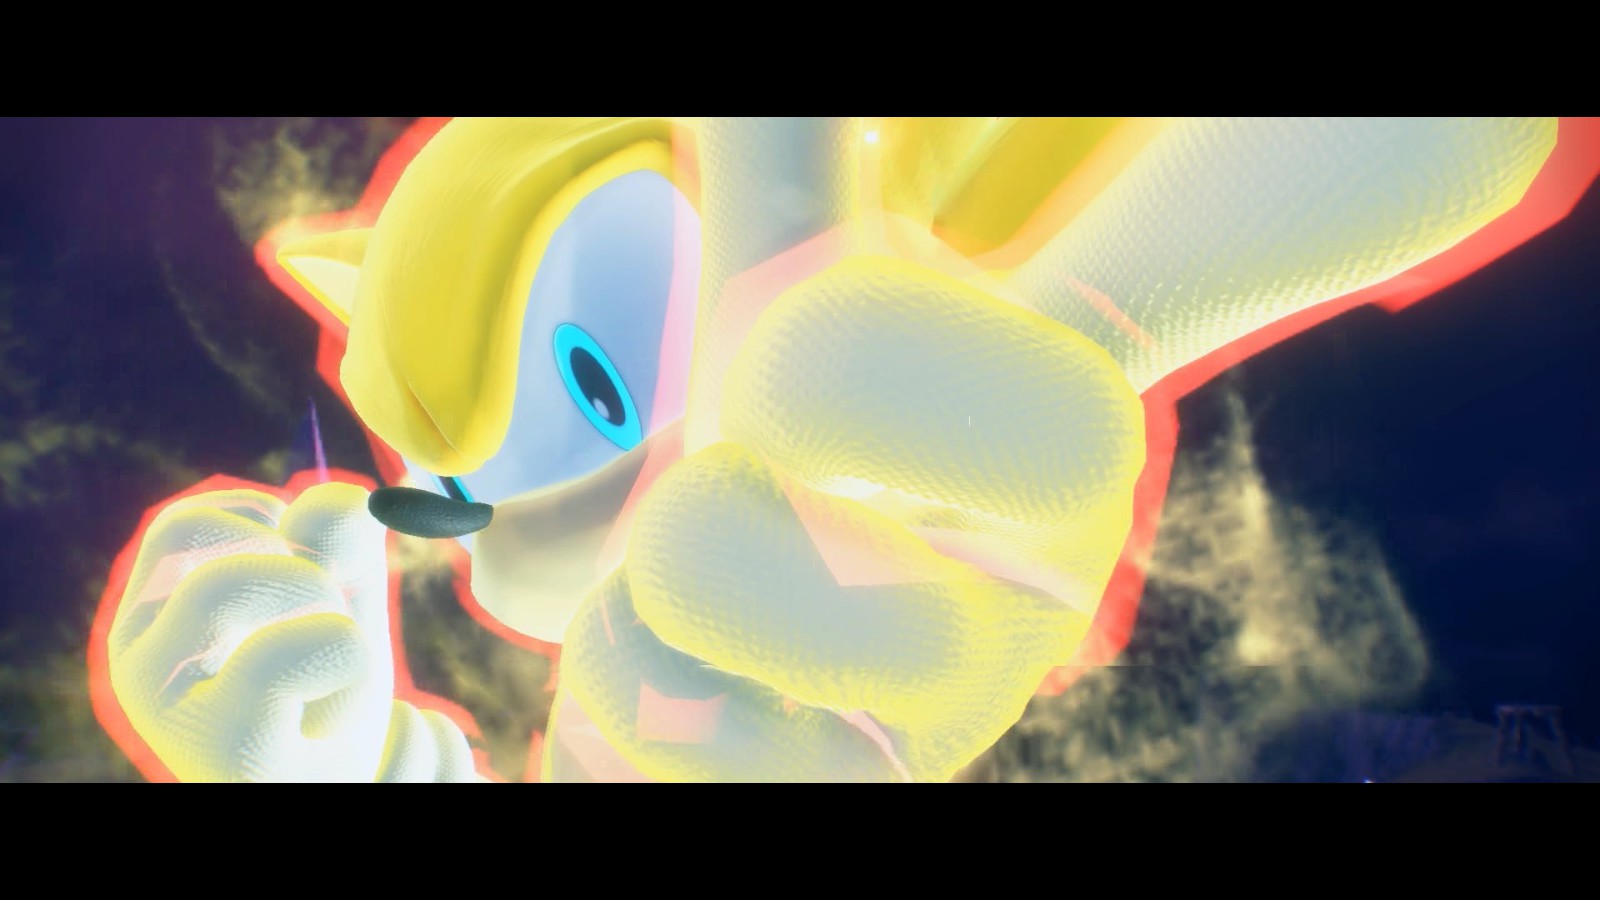 A screenshot of Sonic Frontiers featuring Super Sonic menacingly pointing at the screen. His face now visible with an intense glare at the viewer with his right first raised.